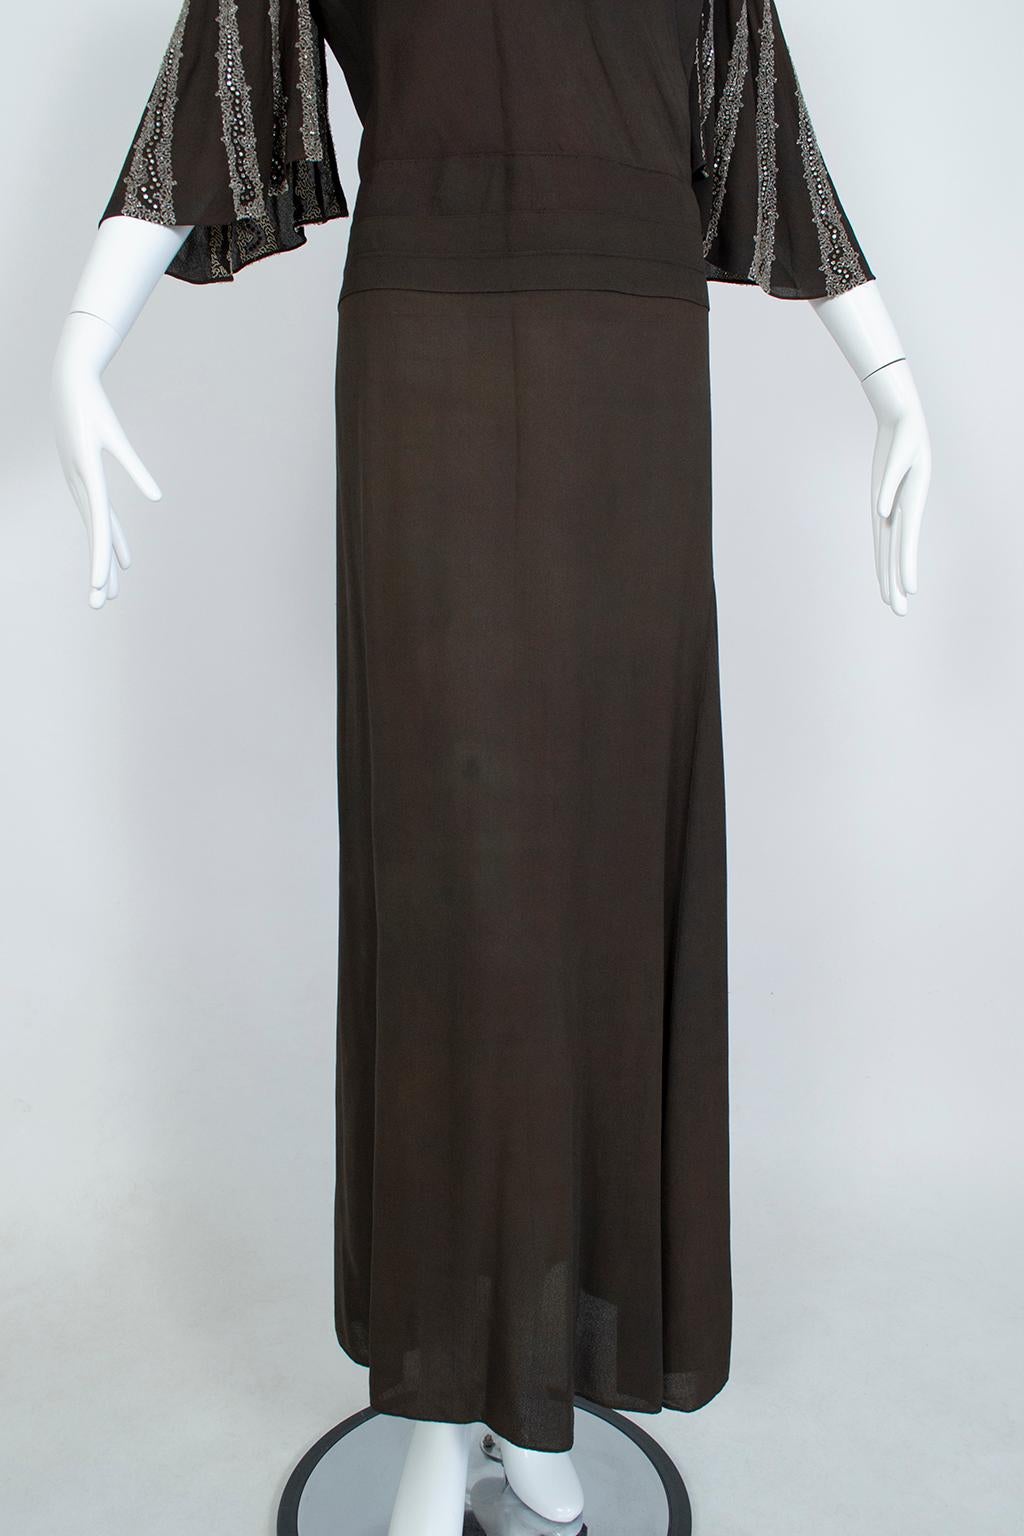 Brown Regency Silk Crêpe Kimono Gown with Crystal Batwing Sleeves - Med, 1930s In Good Condition For Sale In Tucson, AZ